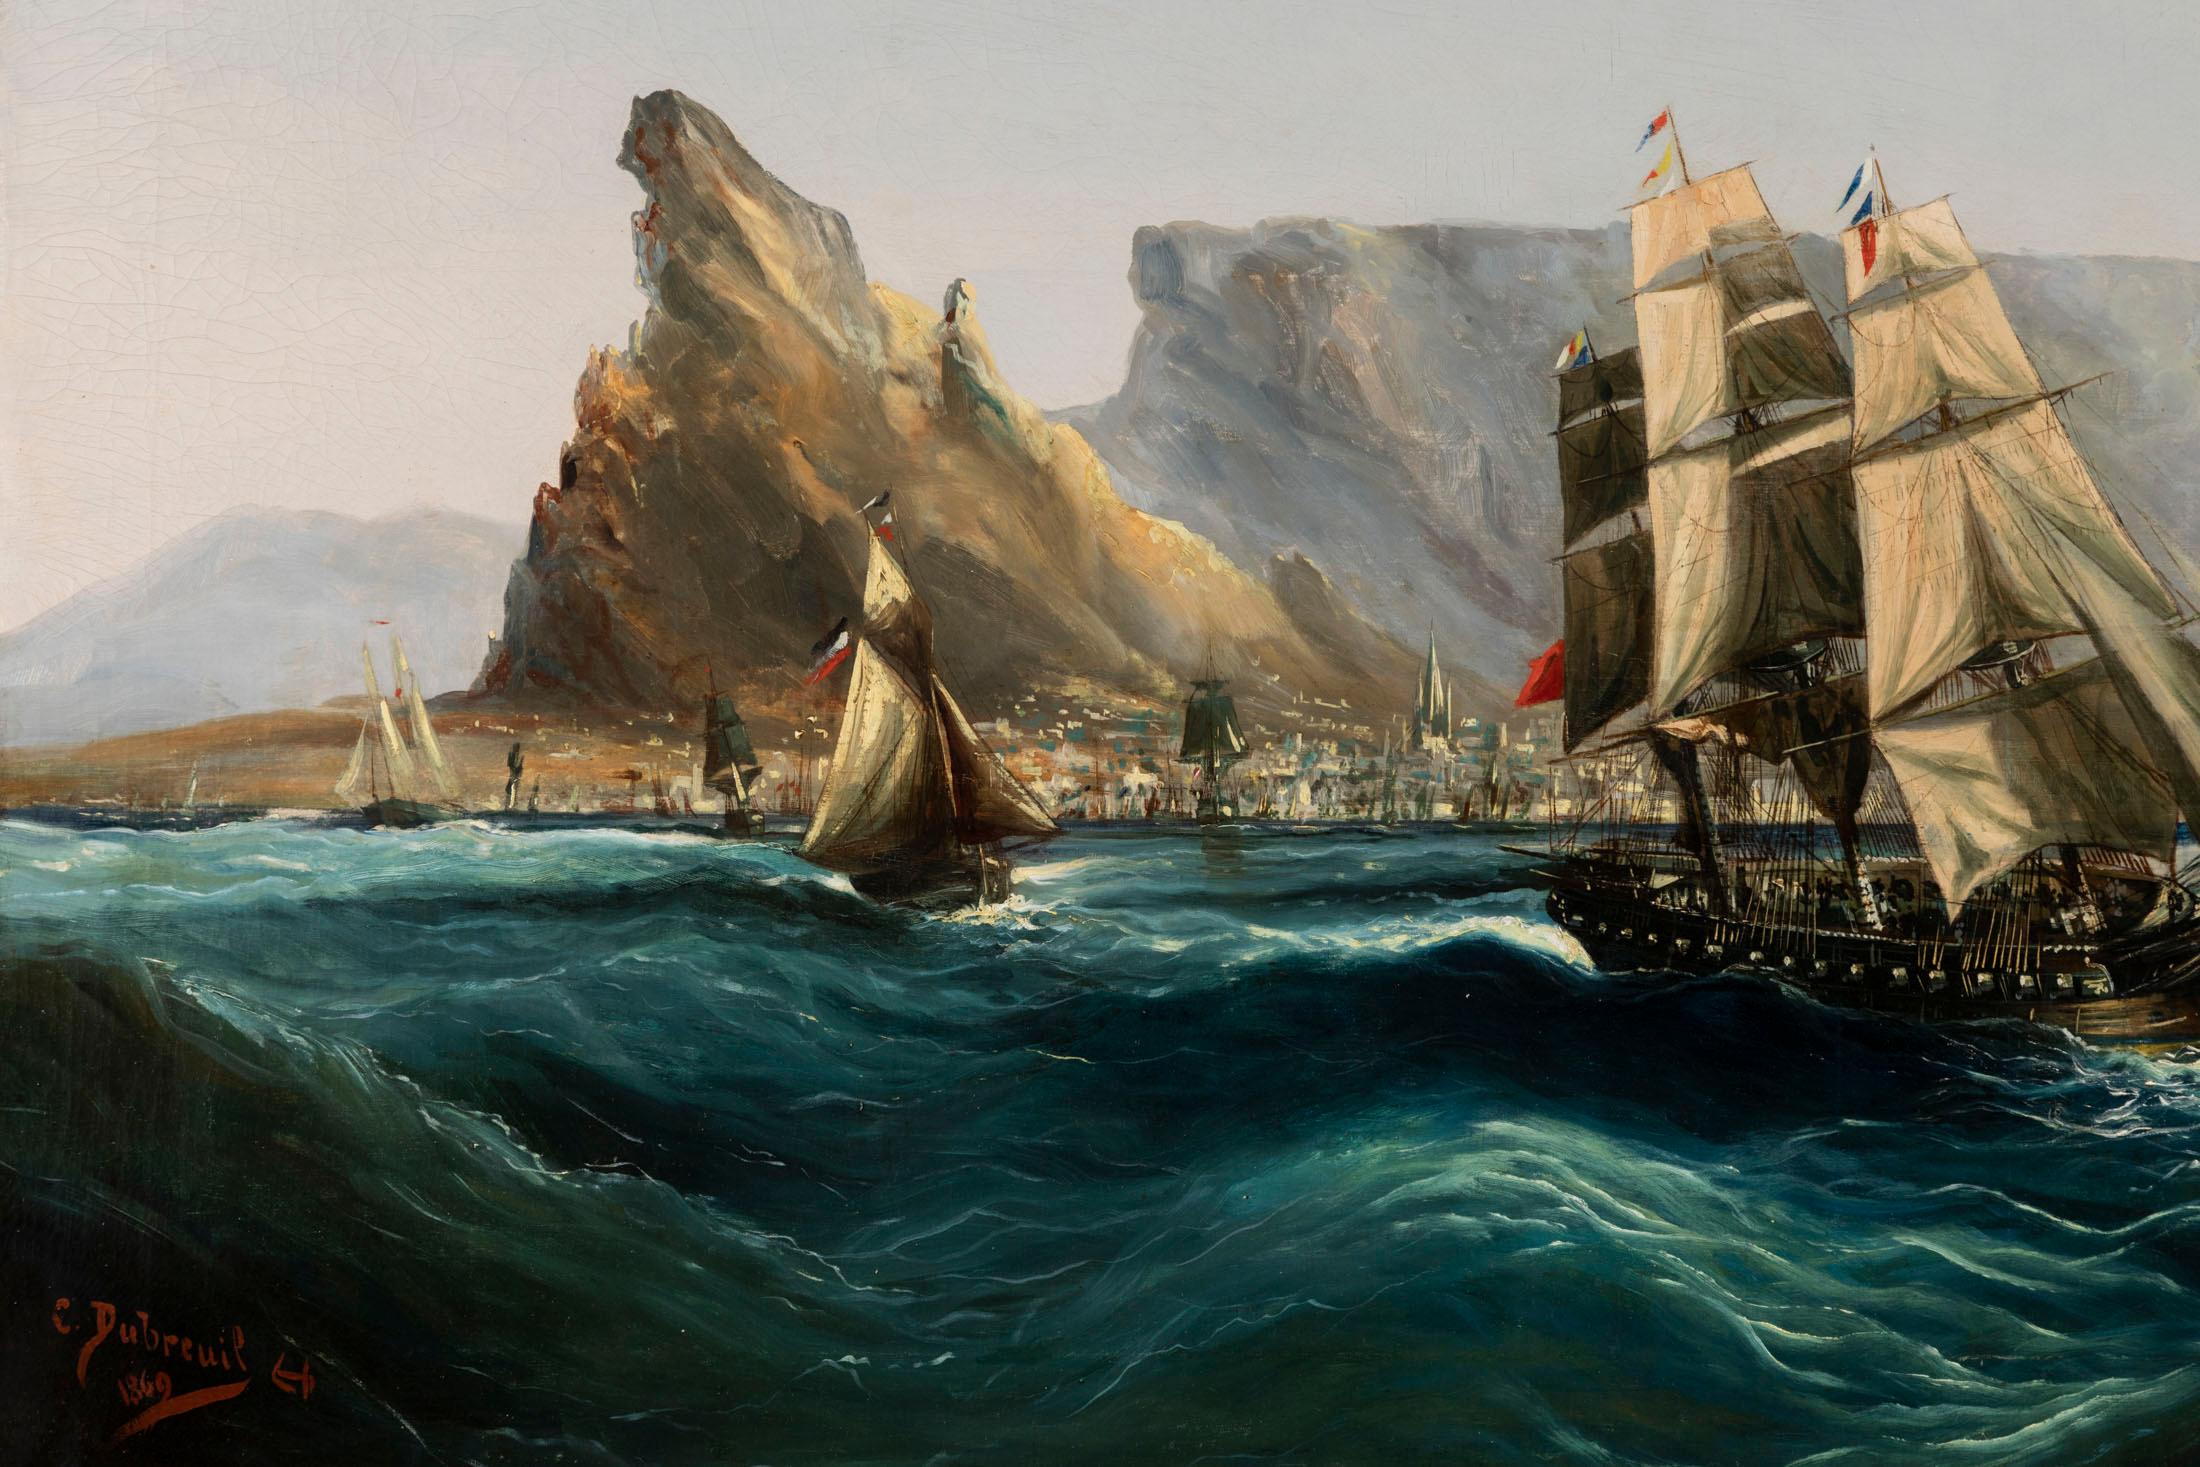 French Marine, Table Bay by Chéri François Dubreuil